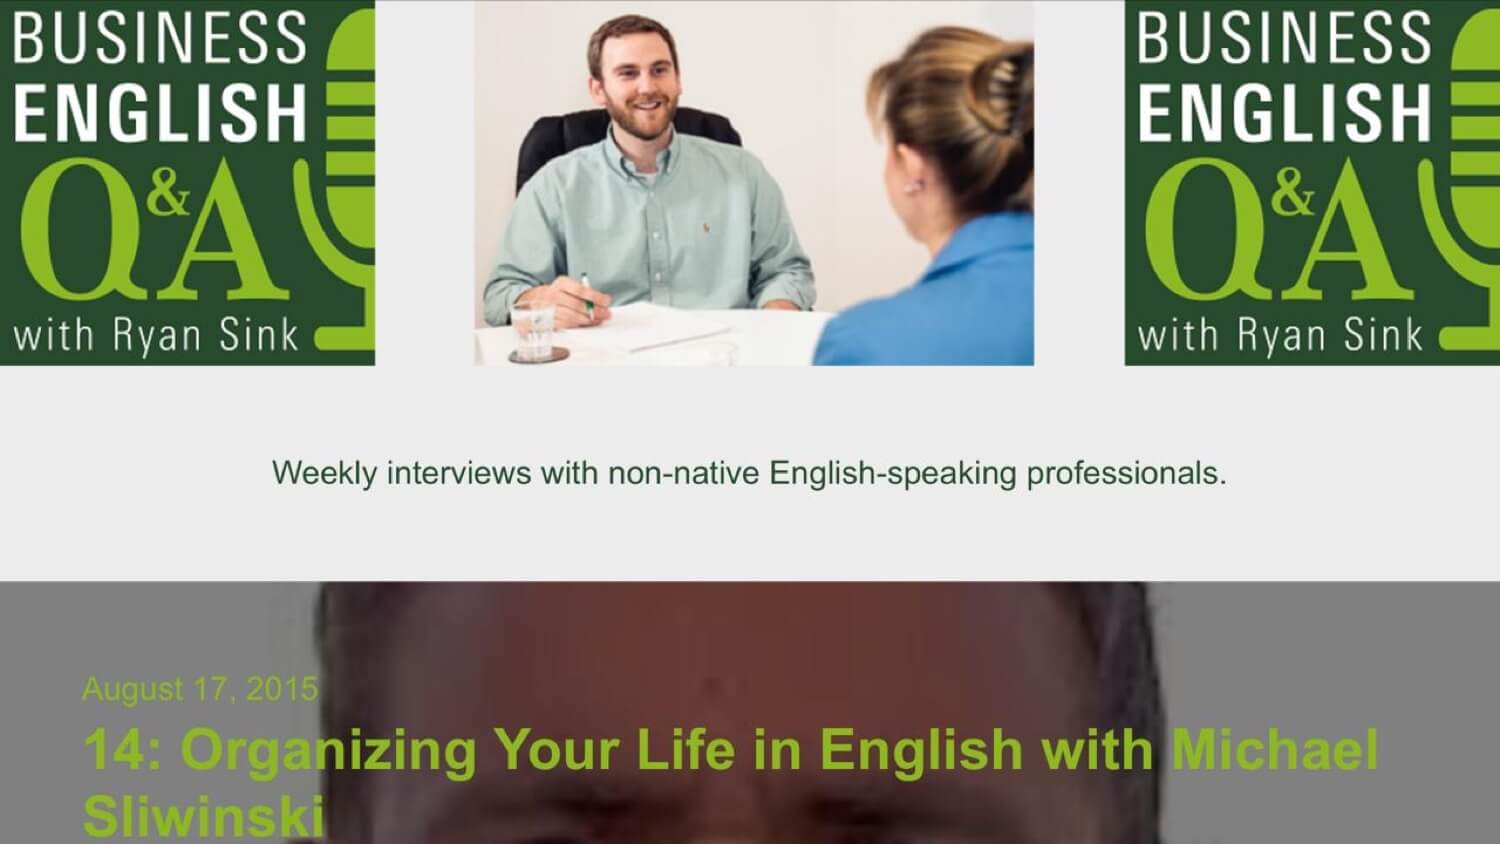 Organizing Your Life in English with Michael Sliwinski [on: Business English Q&A podcast]